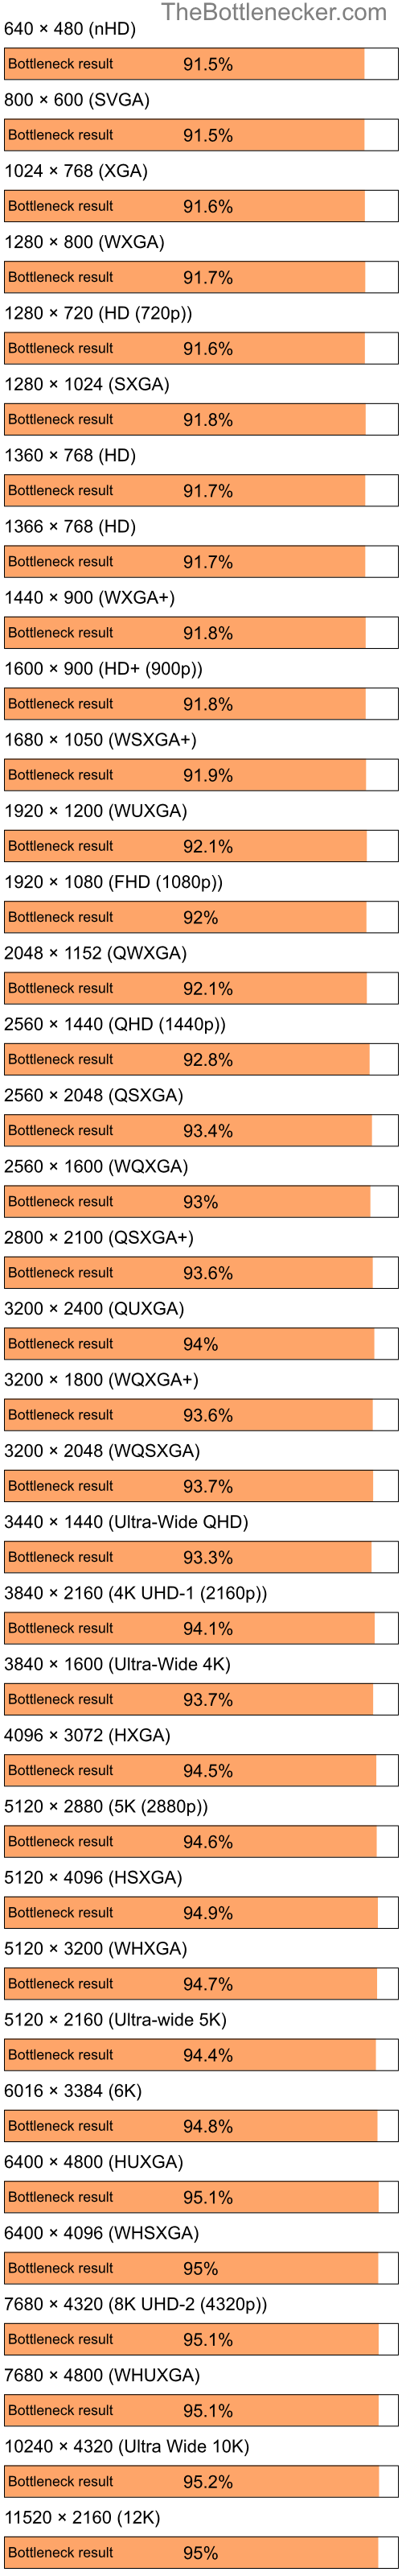 Bottleneck results by resolution for Intel Atom Z520 and NVIDIA GeForce4 MX 420 in Graphic Card Intense Tasks